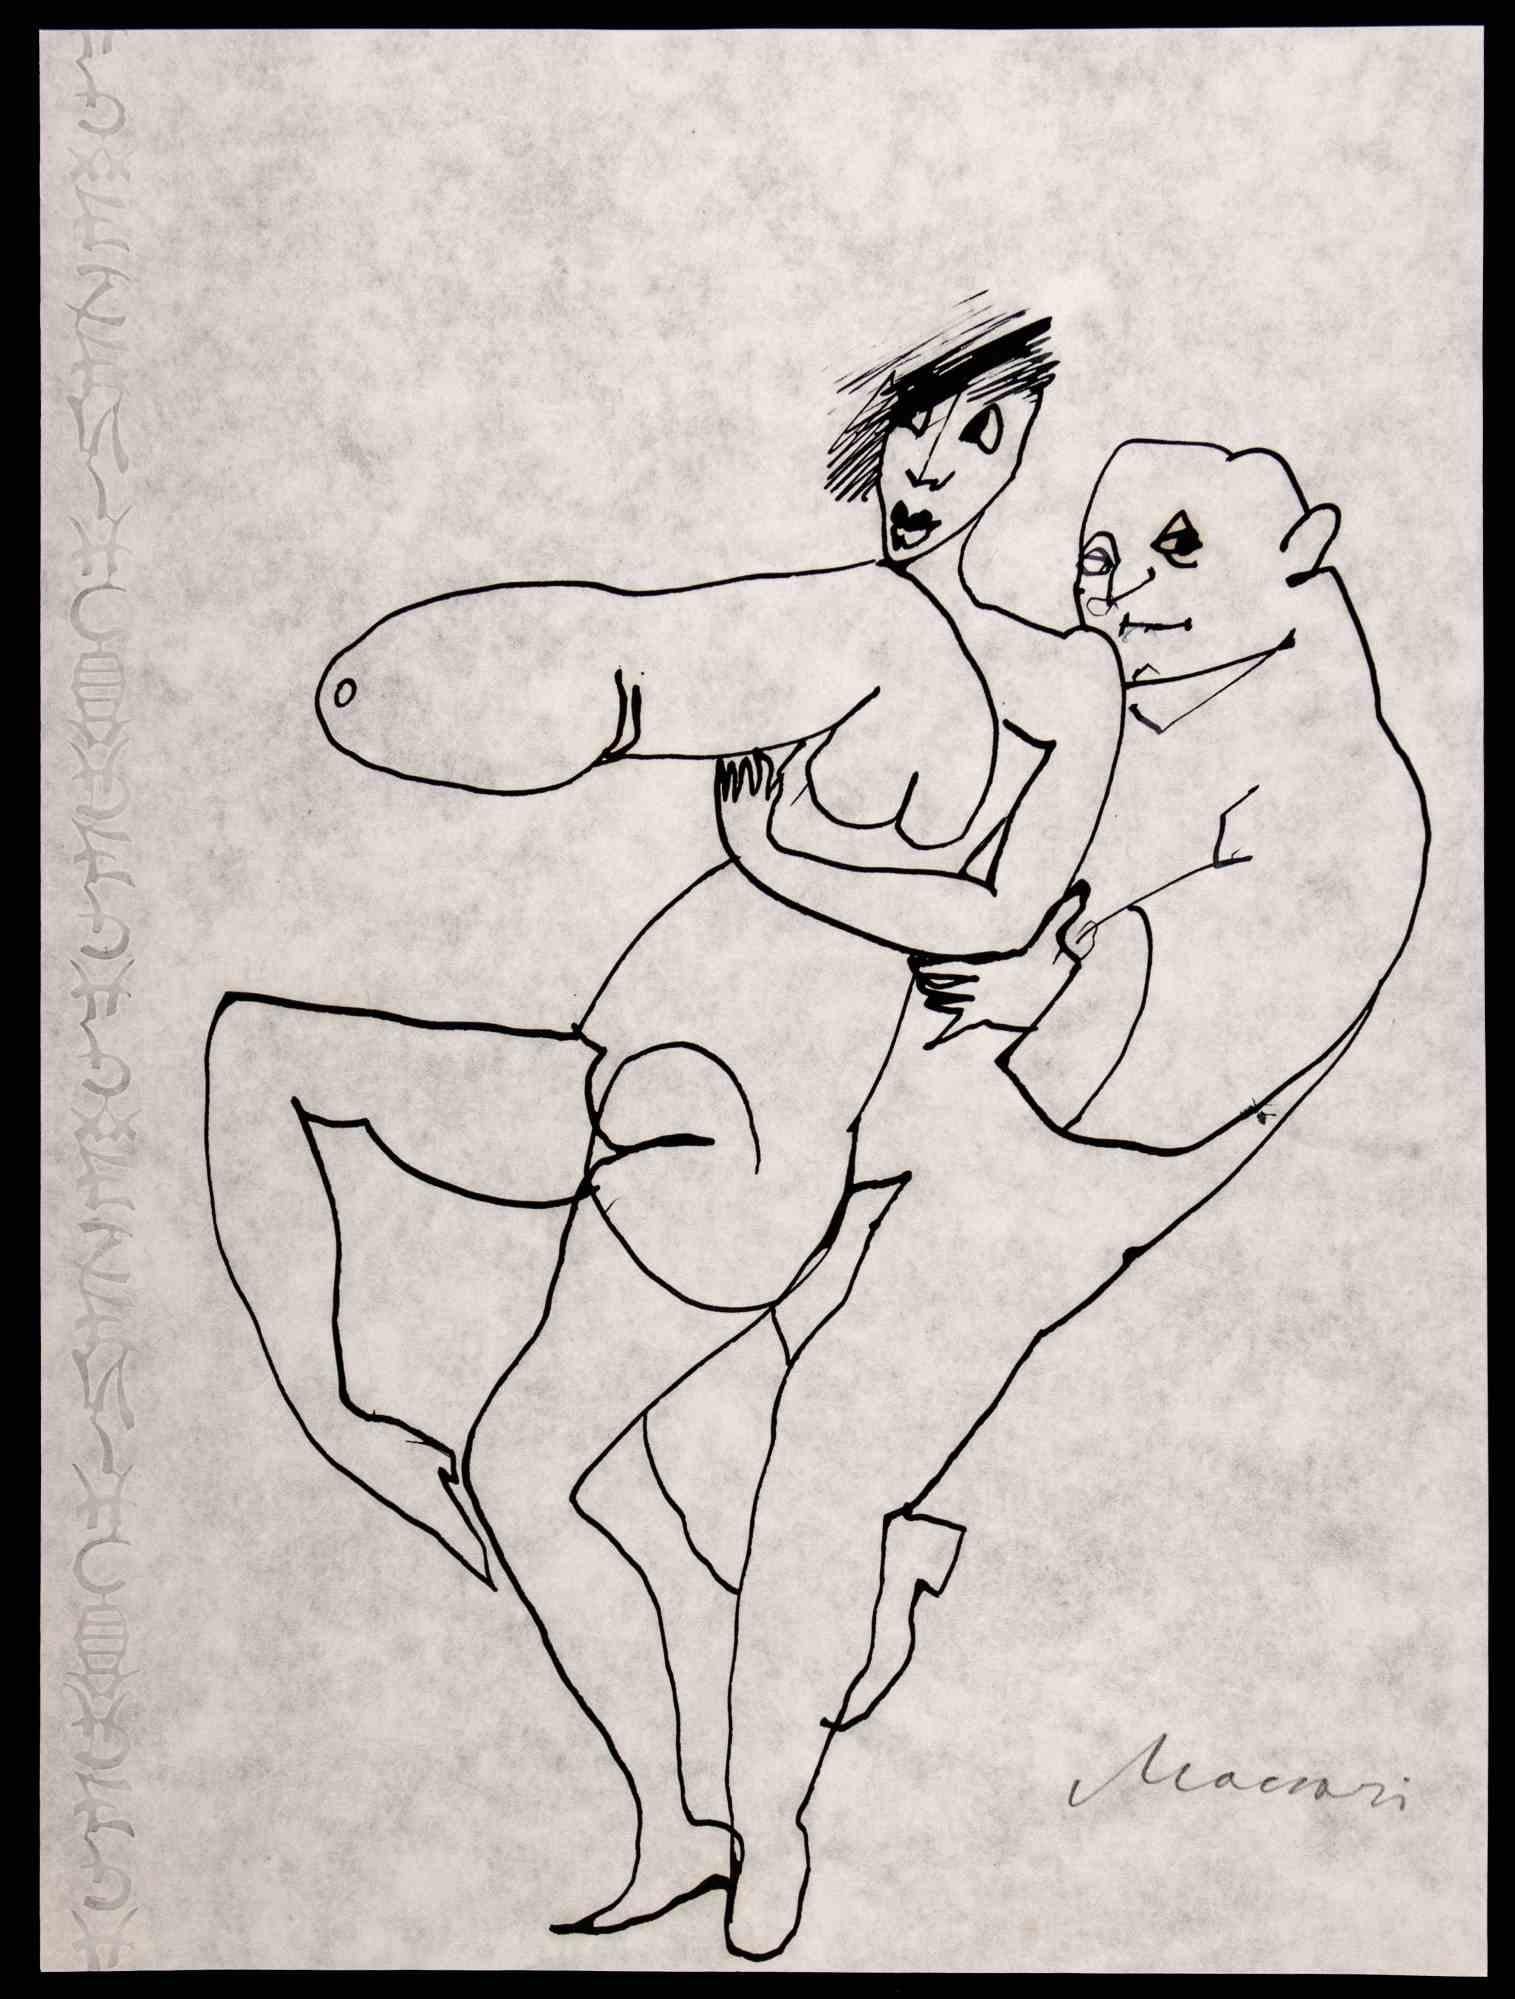 The Couple - Ink Drawing by Mino Maccari - 1970